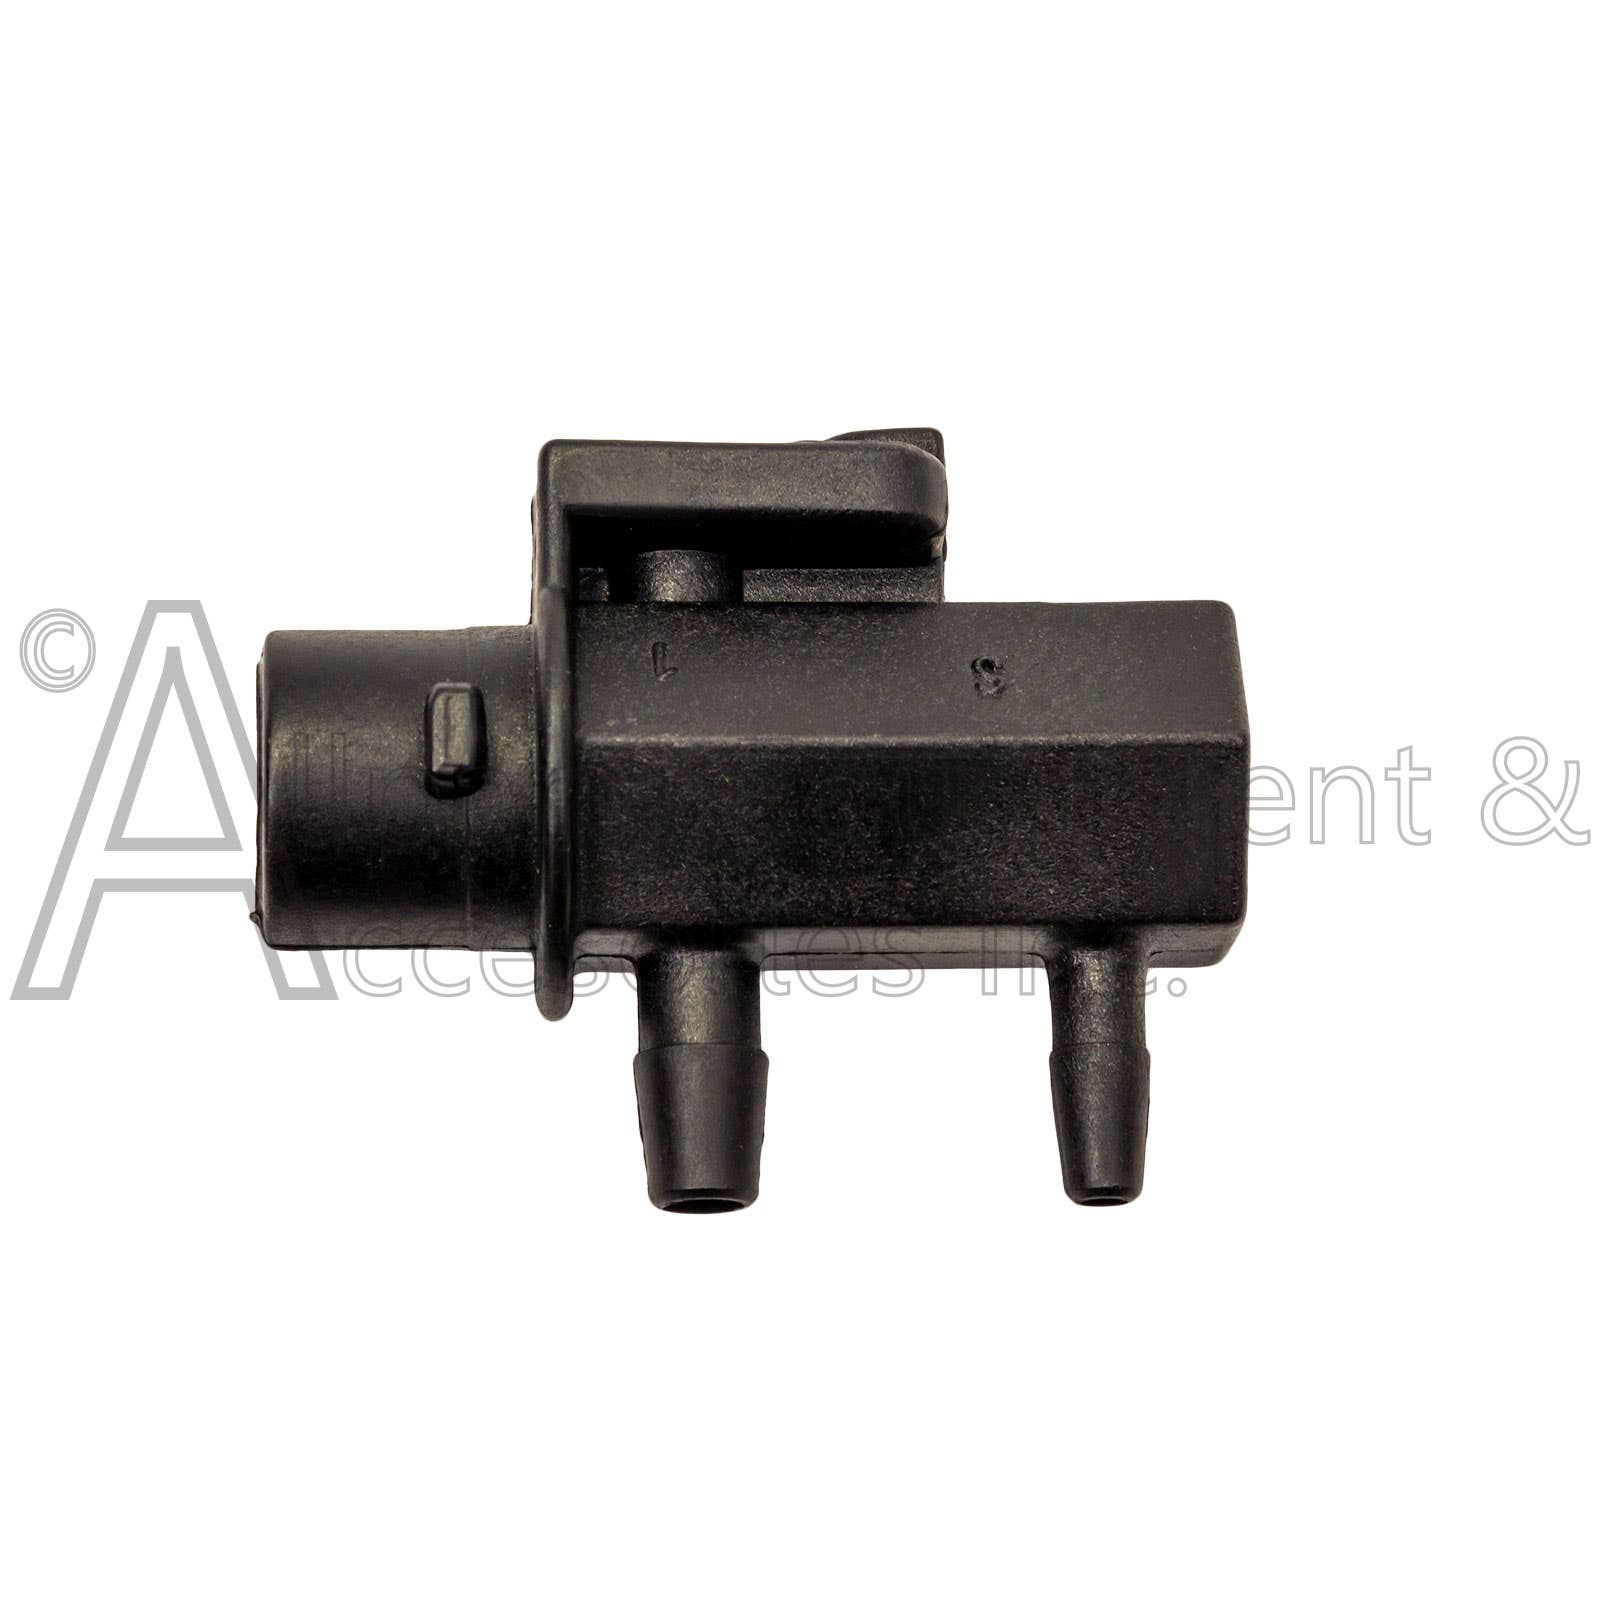 21-1122 NOZZLE ADAPTOR FOR PORTABLE FORCED AIR HEATERS - 50/75K